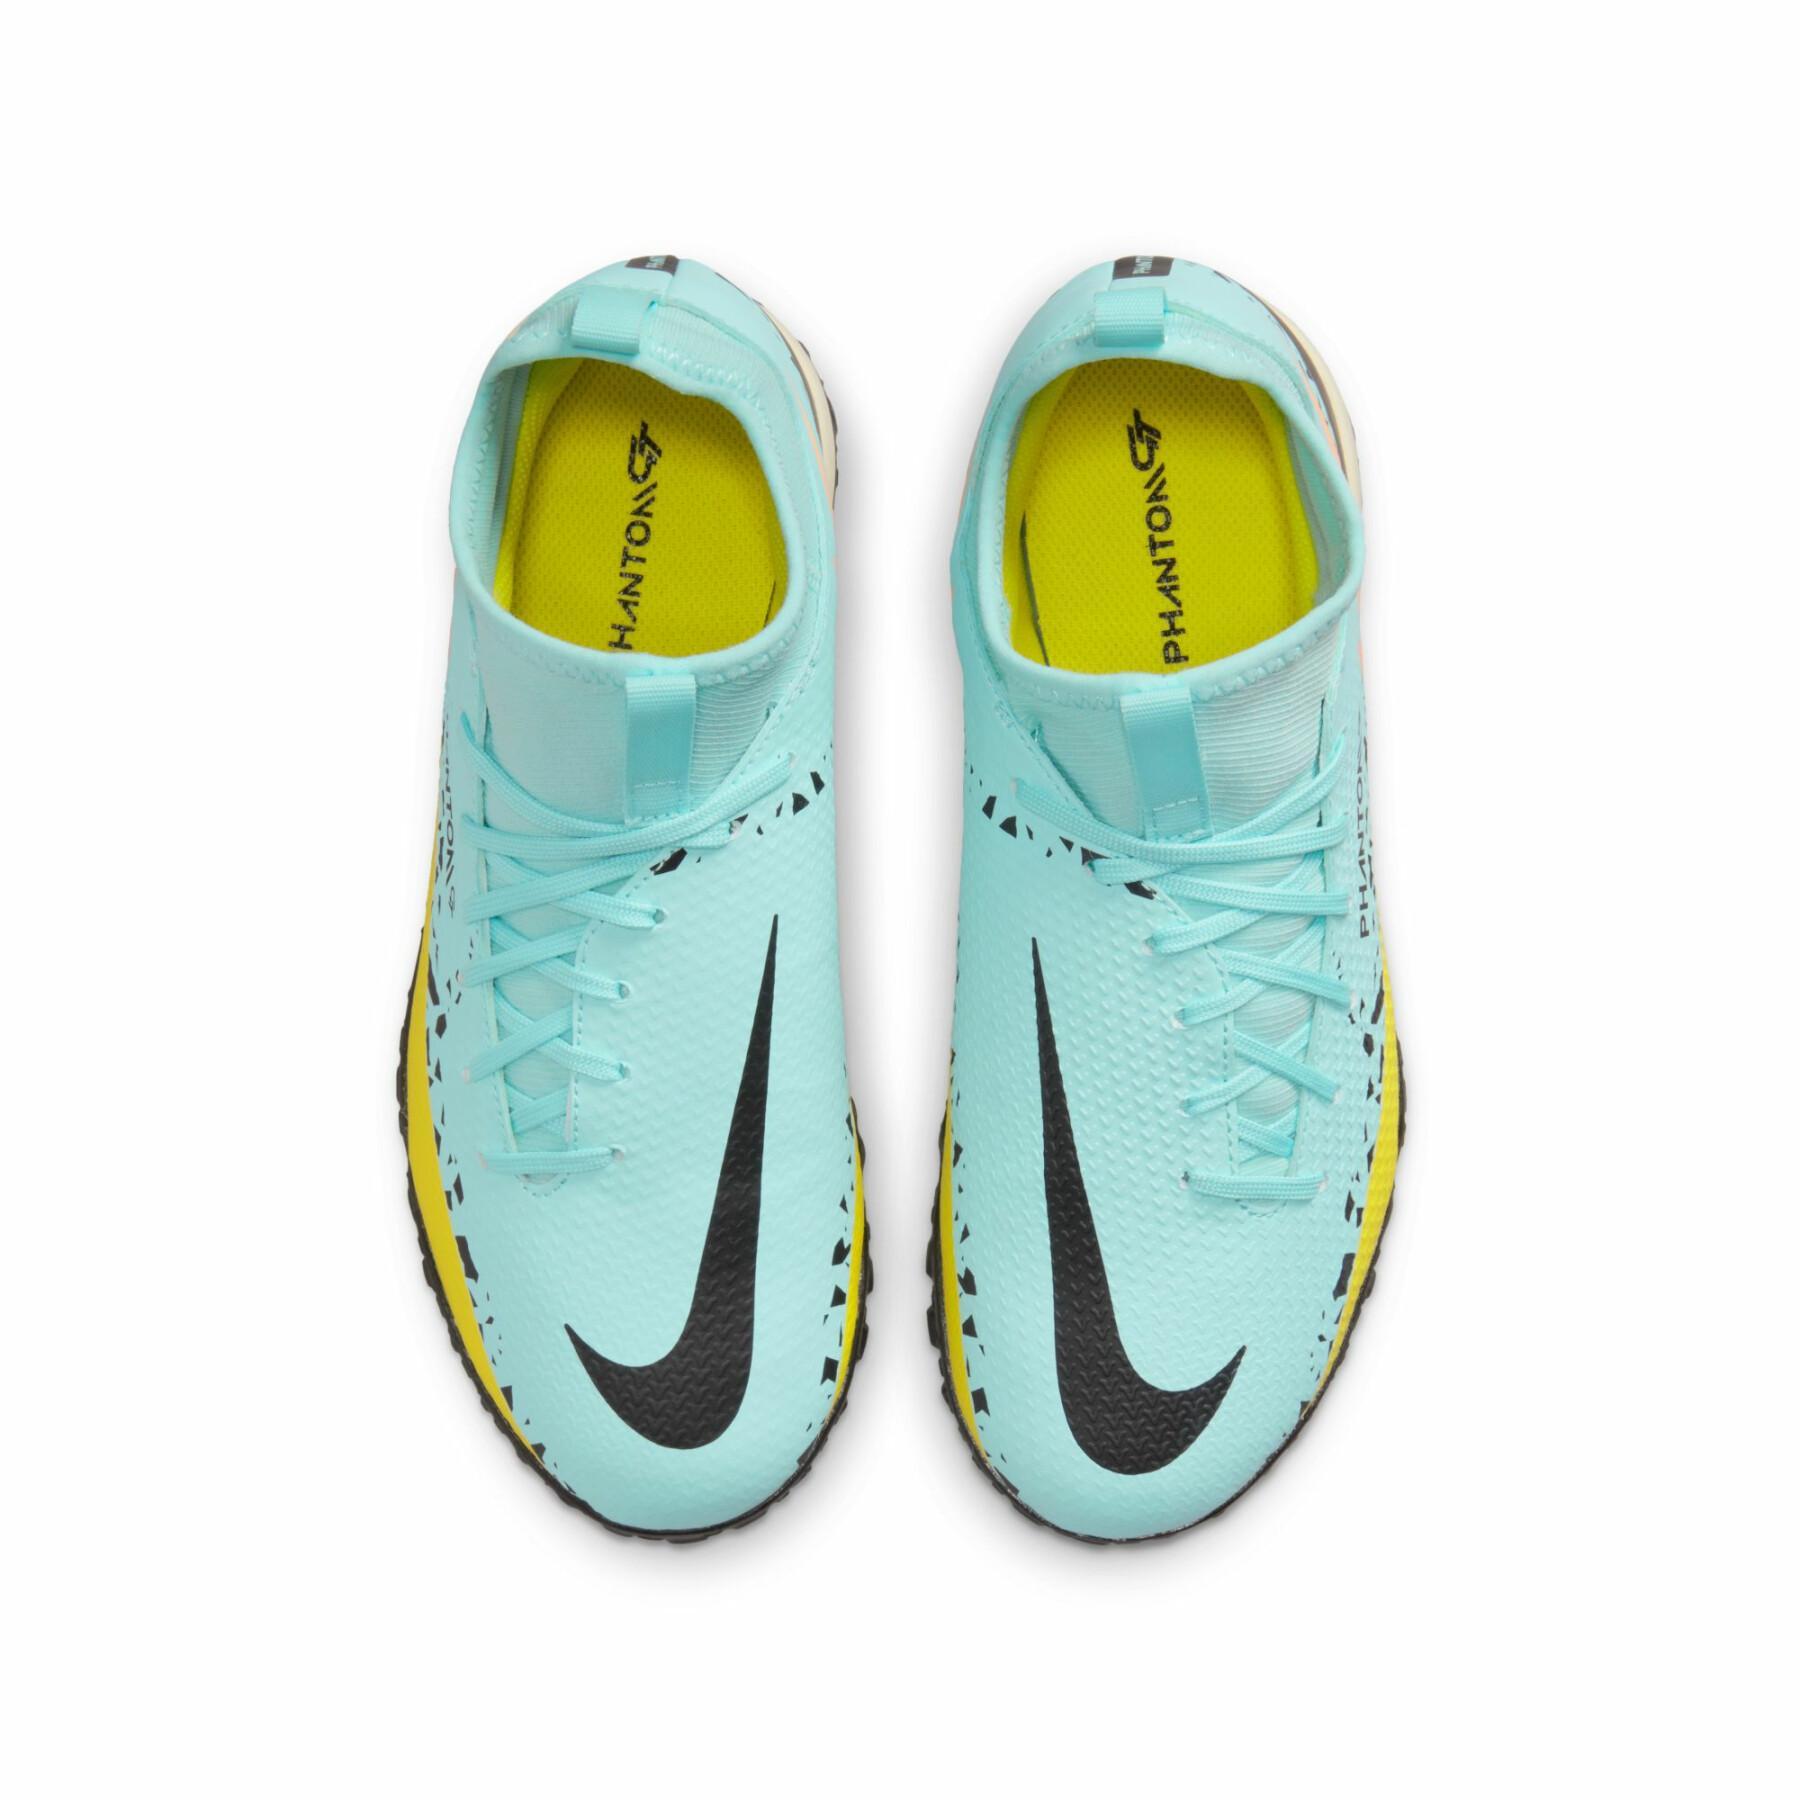 Chaussures de football enfant Nike Phantom GT2 Academy Dynamic Fit TF - Lucent Pack